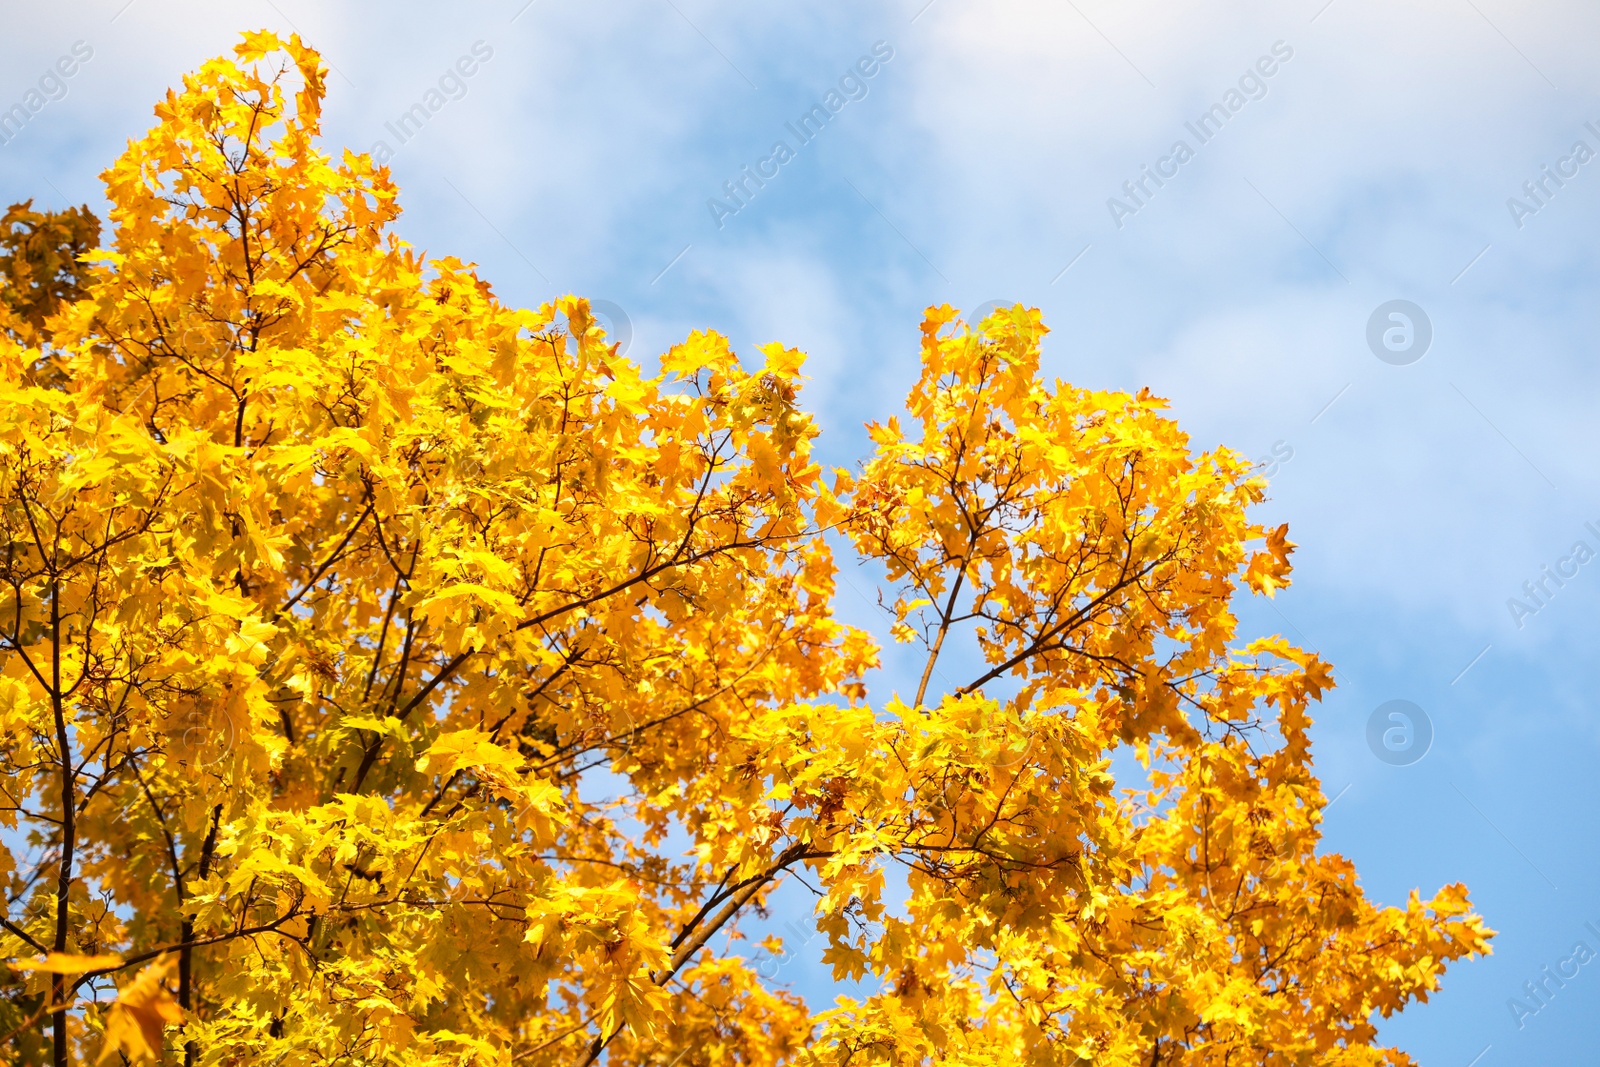 Photo of Beautiful tree with golden leaves and blue sky, bottom view. Autumn season